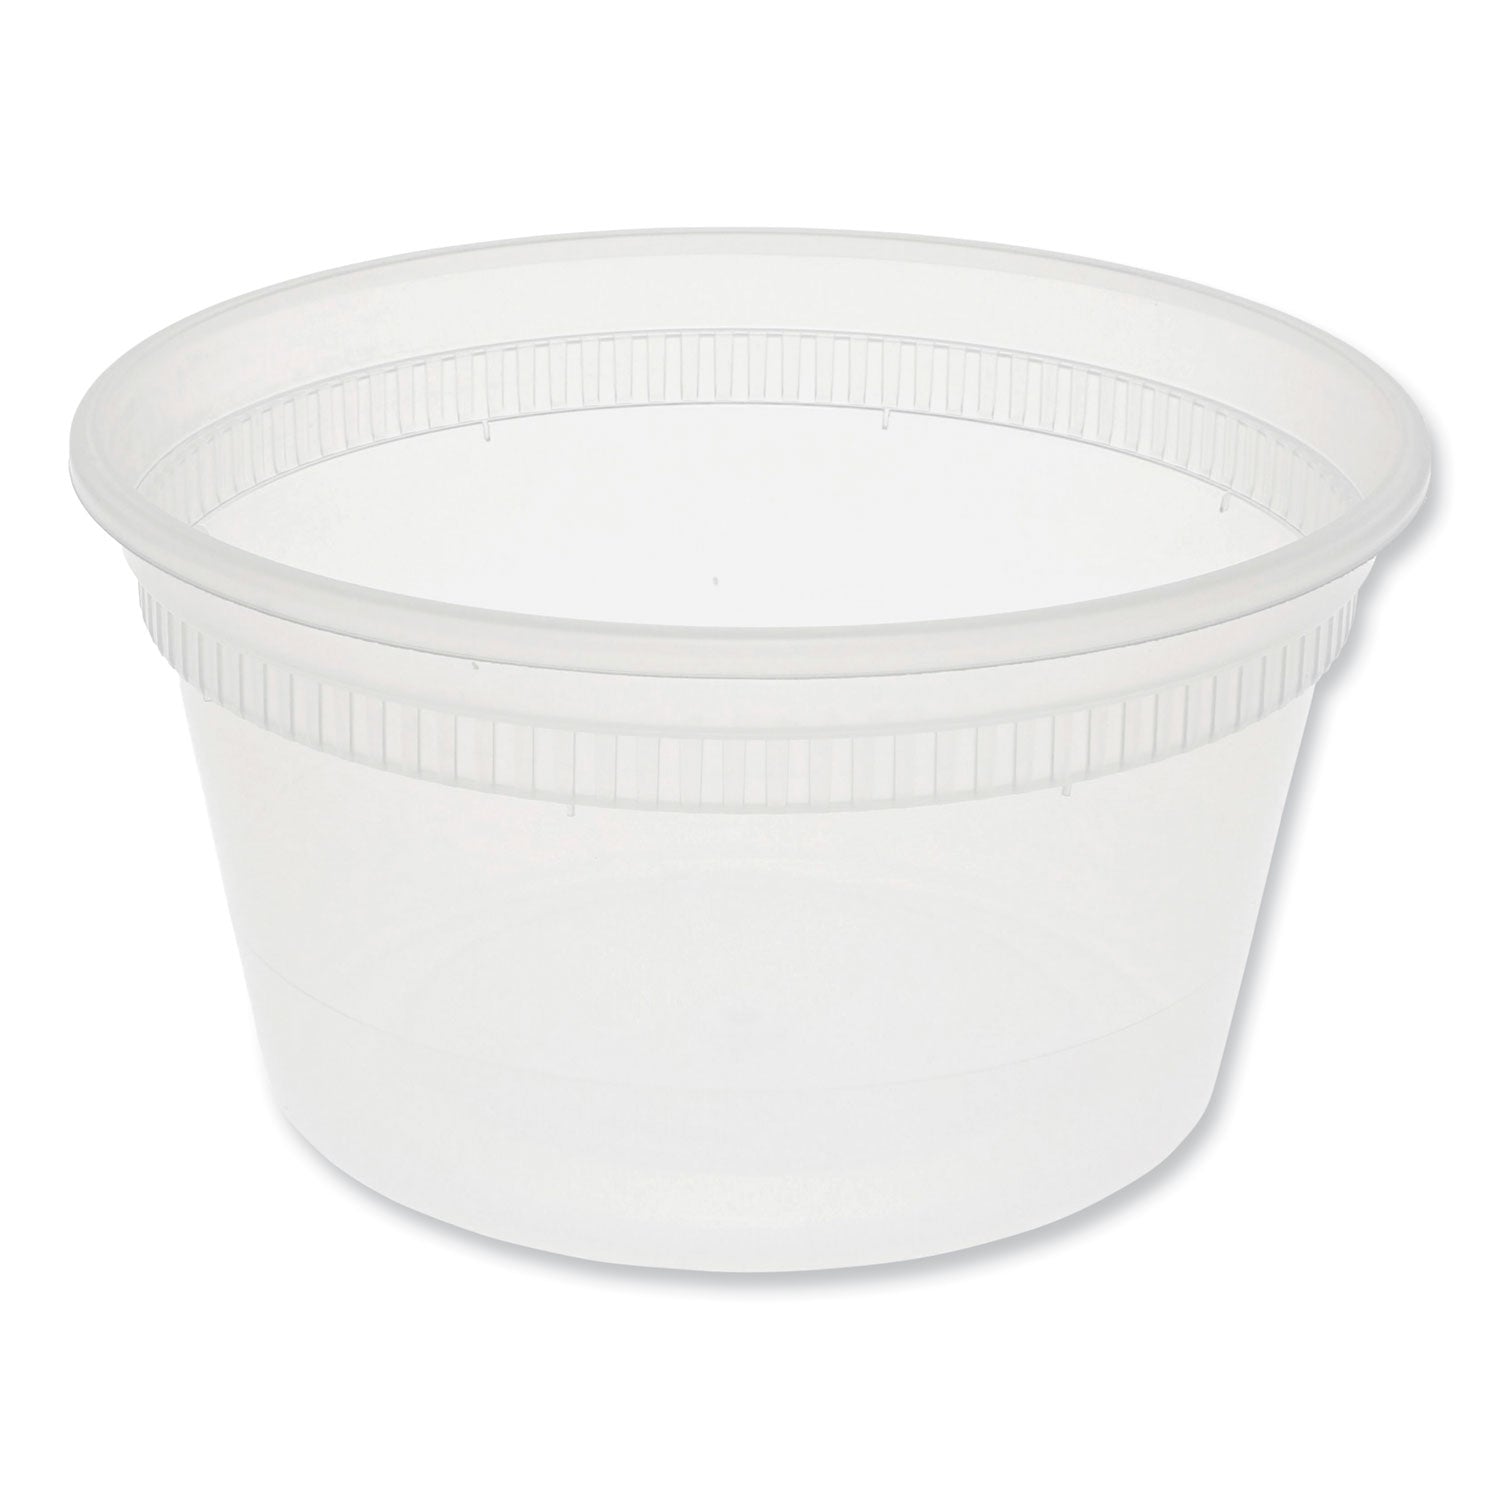 newspring-delitainer-microwavable-container-12-oz-455-x-455-x-245-clear-plastic-480-carton_pctl5012y - 1